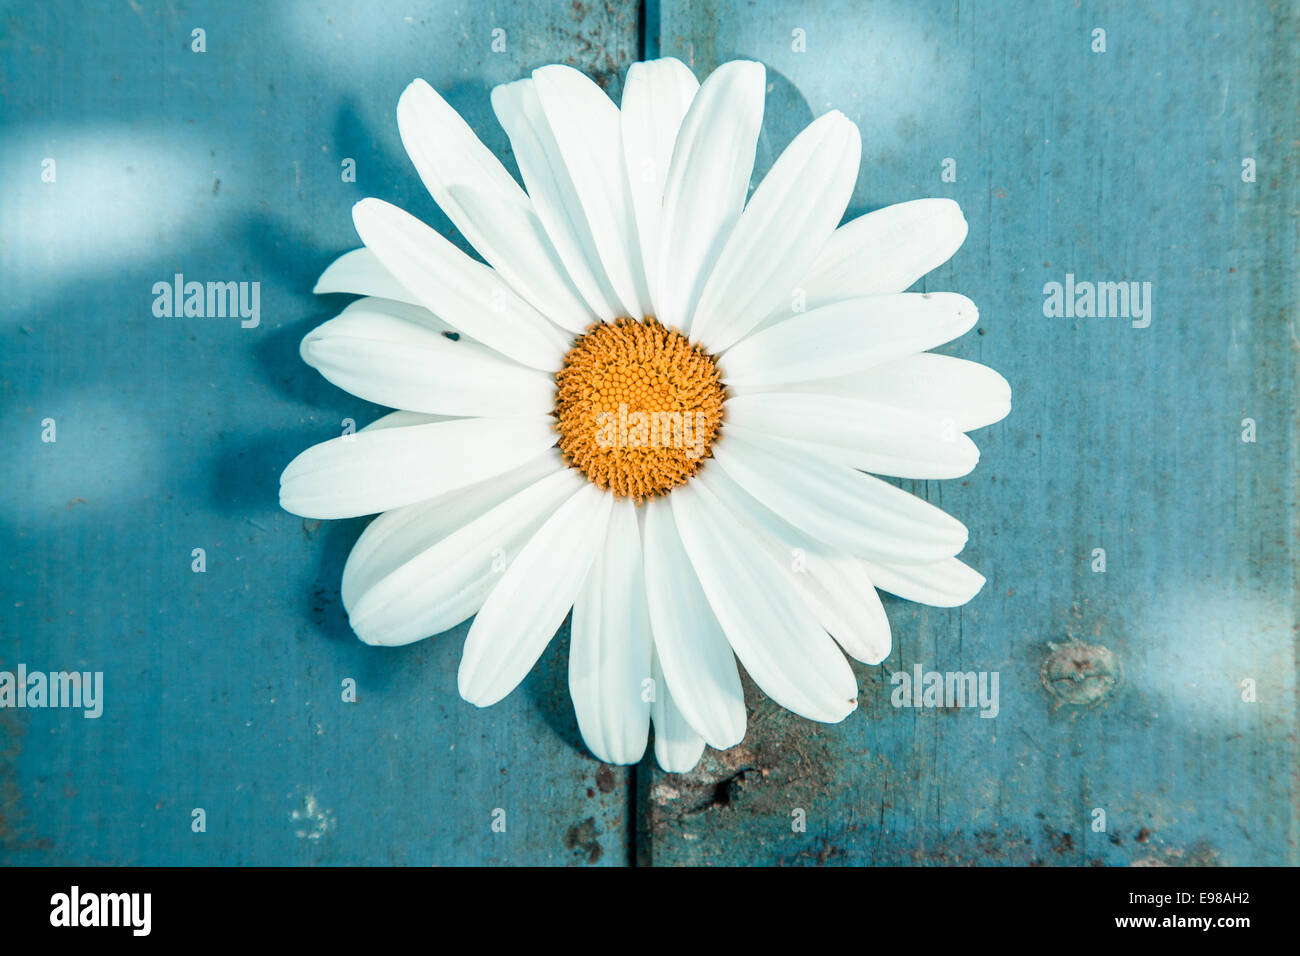 Close-up of a daisy, symbol of innocence, shot from high angle Stock Photo